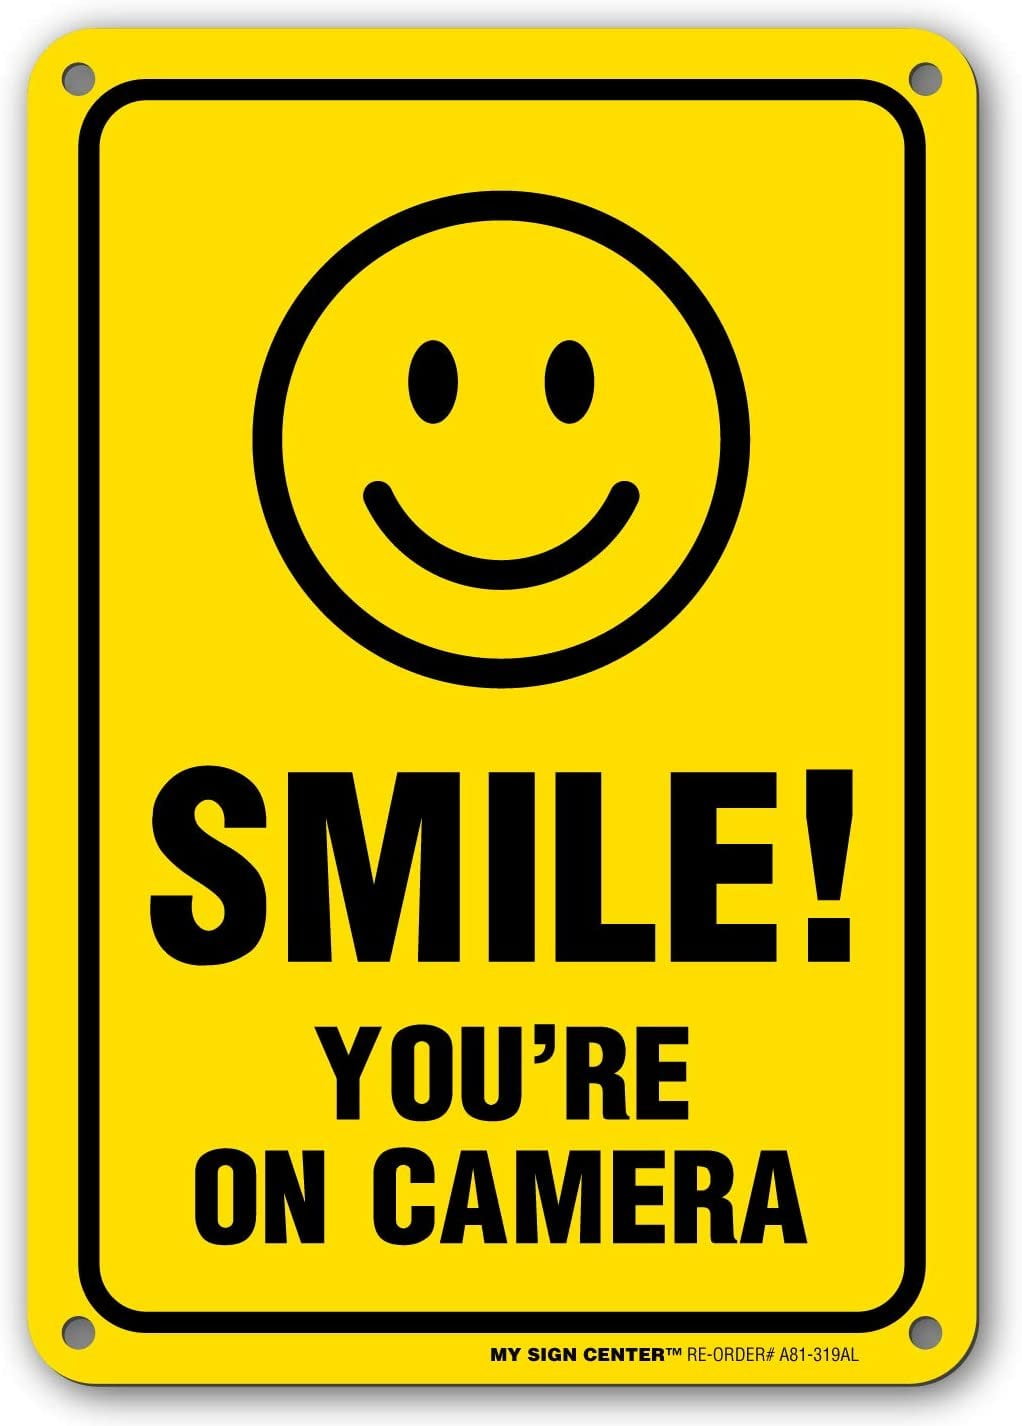 LOT OF 5 SMILE SURVEILLANCE SECURITY CCTV CAMERA OUTDOOR WARNING STICKER DECALS 